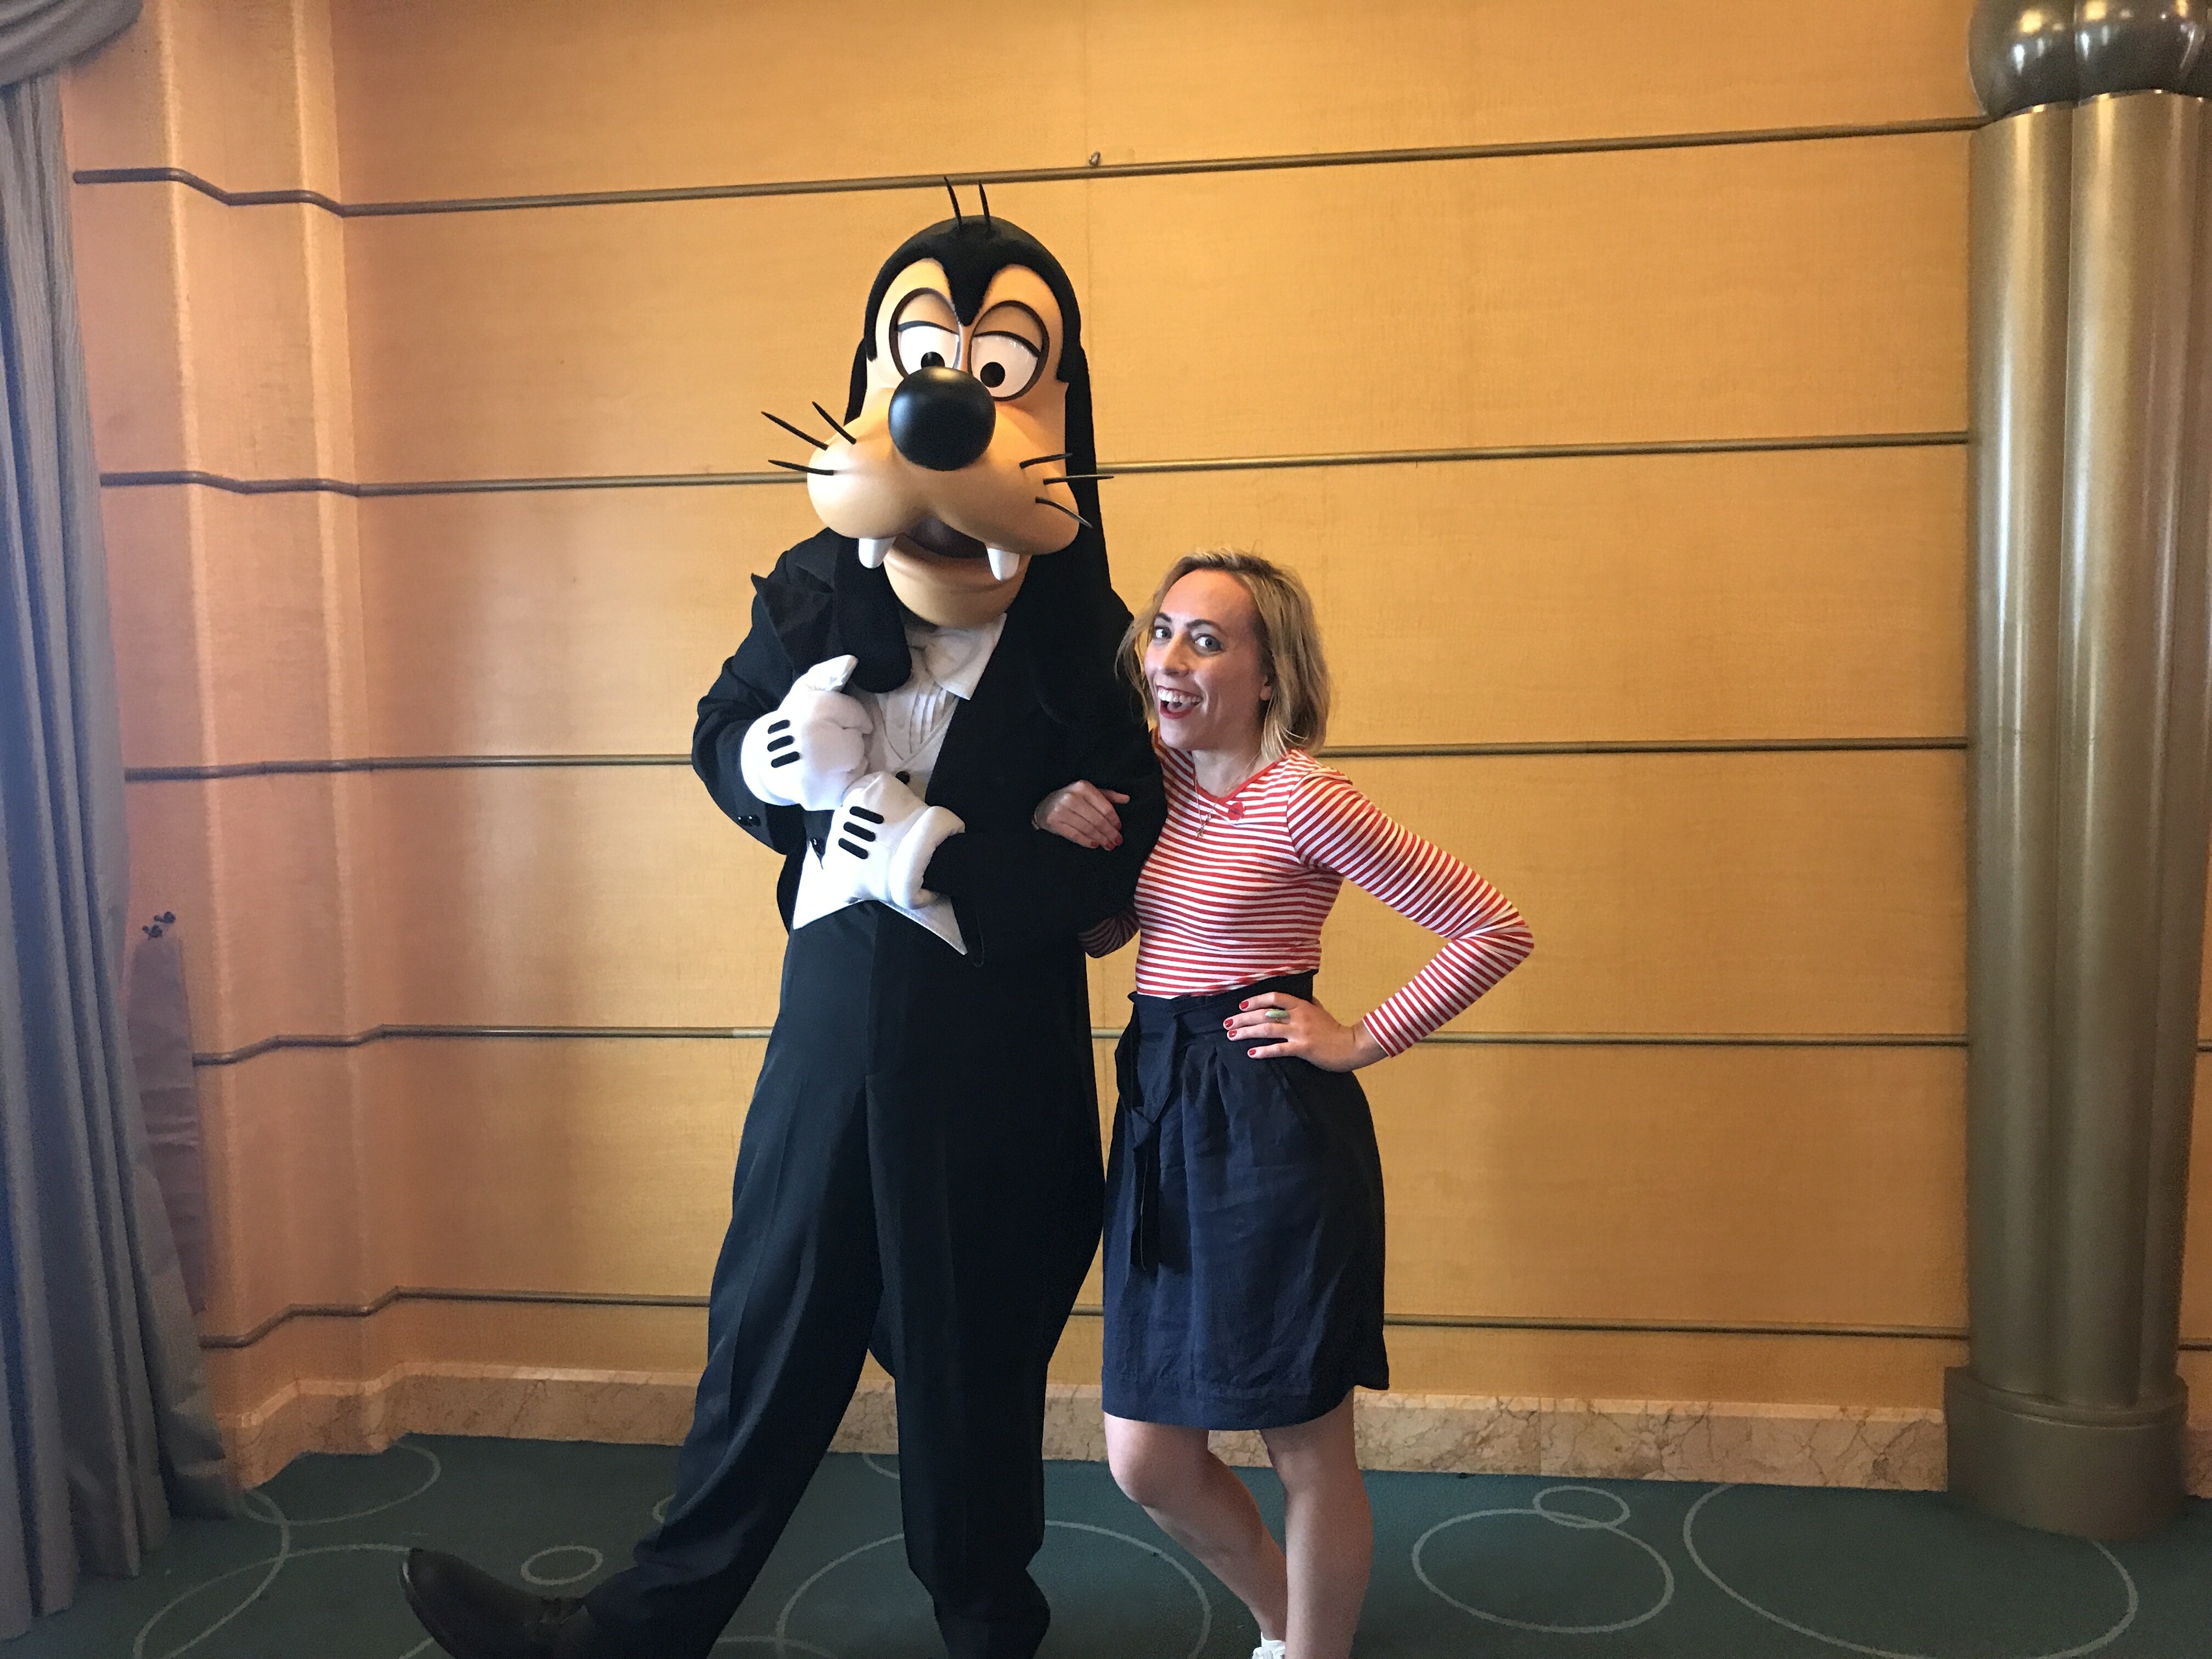 Goofy in Formal Wear and Oh My Disney Host Michelle Lema